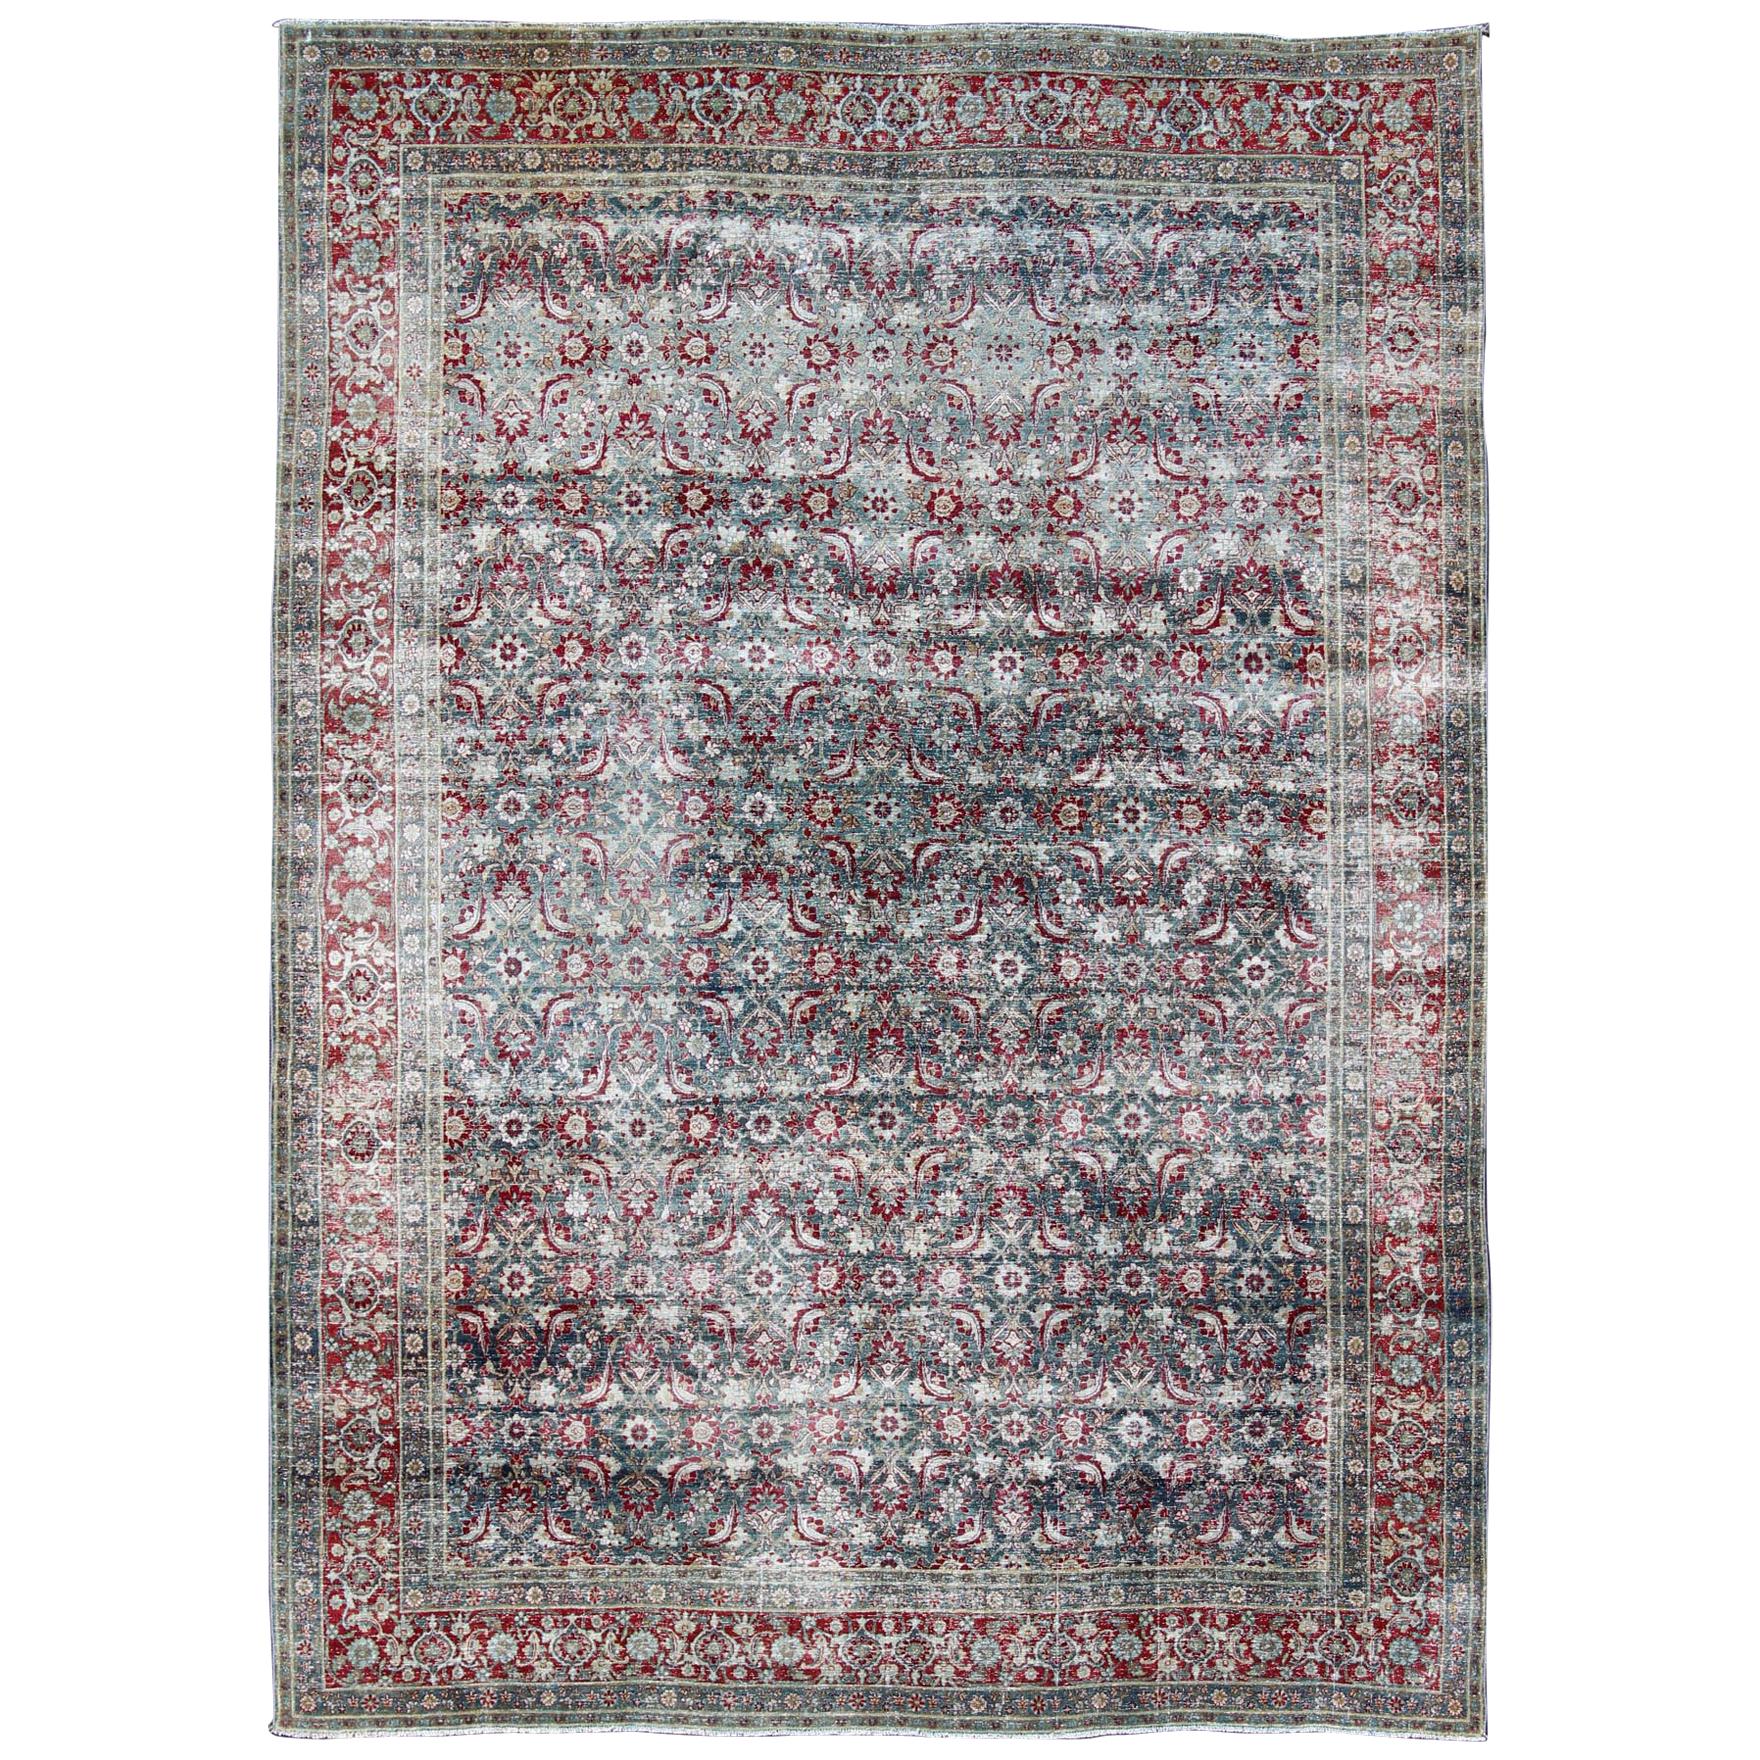 Antique Persian Yazd Rug with Floral-Geometric Design in Red and Blue For Sale